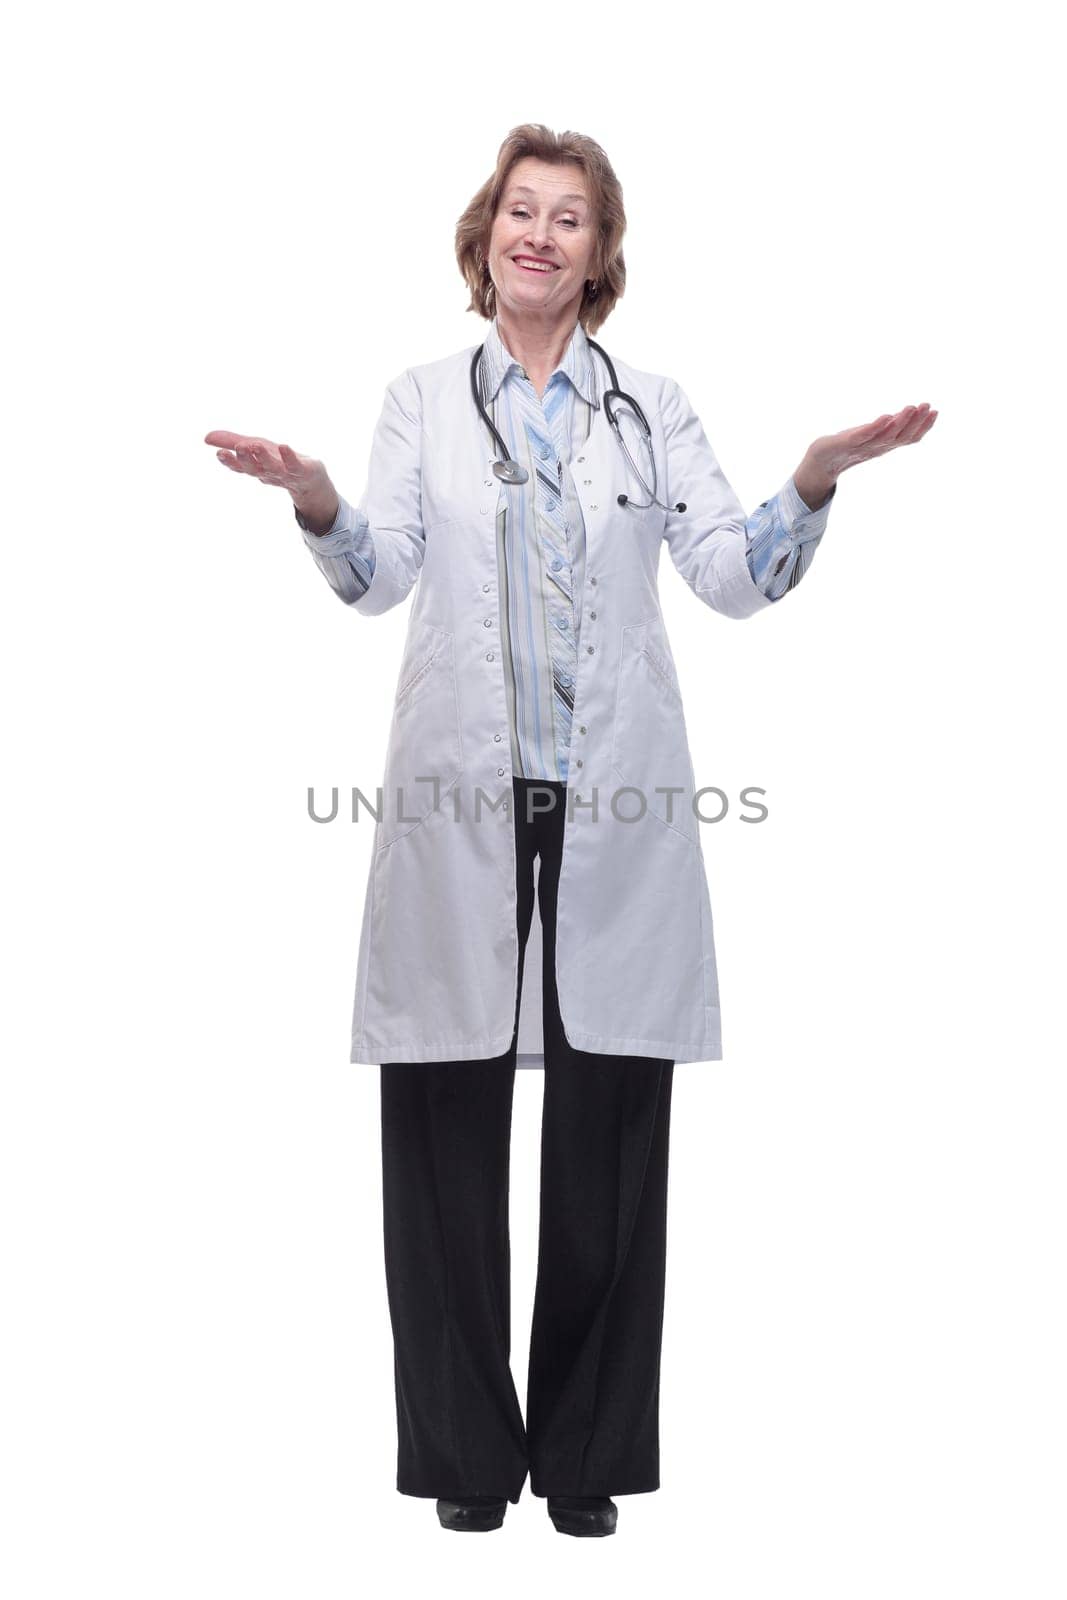 Smiling medical worker with stethoscope and positive attitude. Isolated over white background.